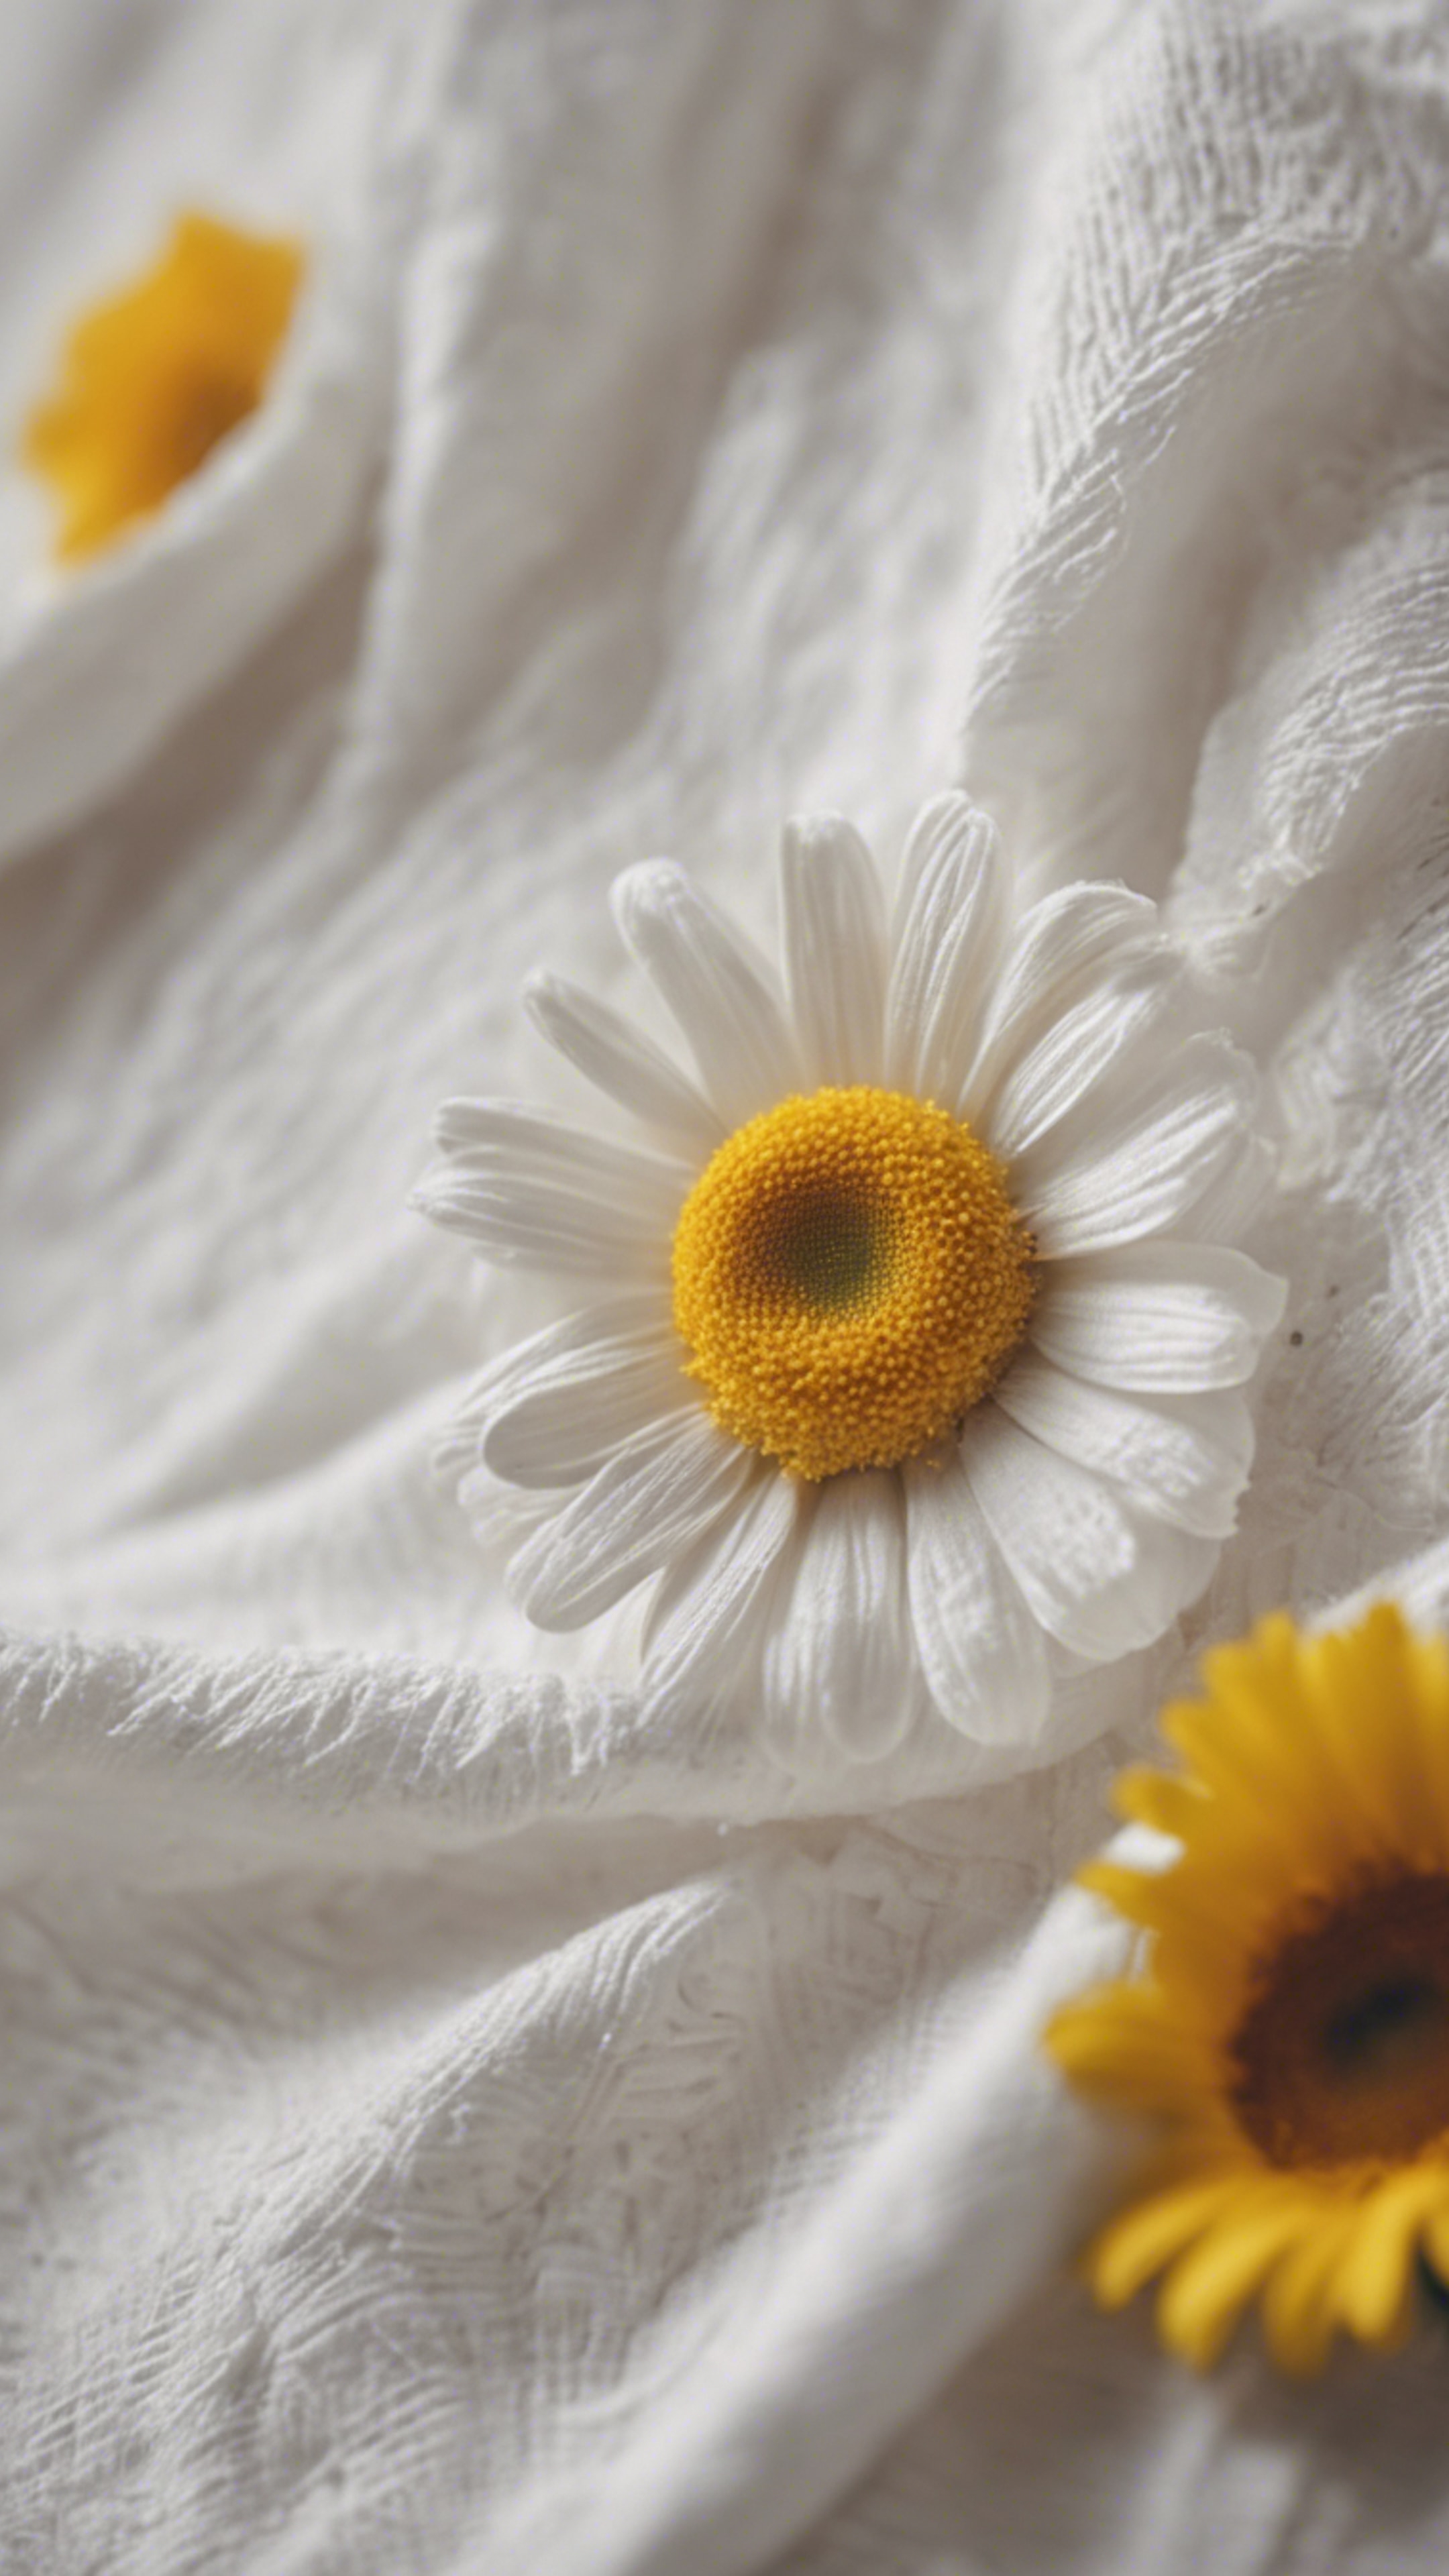 A white cotton dress with a daisy, featuring yellow petals and a white center. Tapeta[81c17e18773146008e6c]